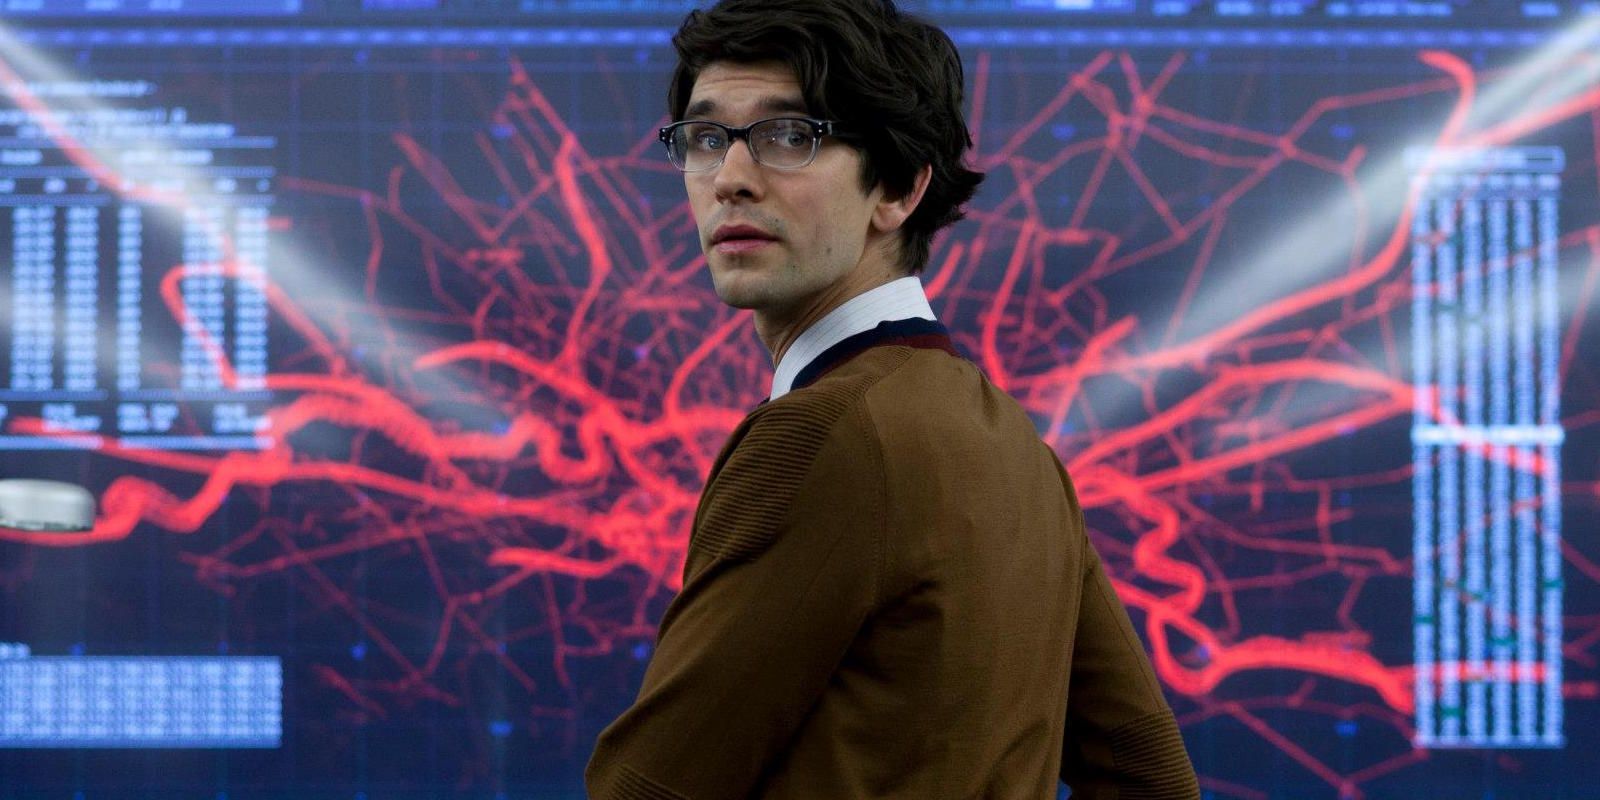 Skyfall star Ben Whishaw cast in Mary Poppins Returns